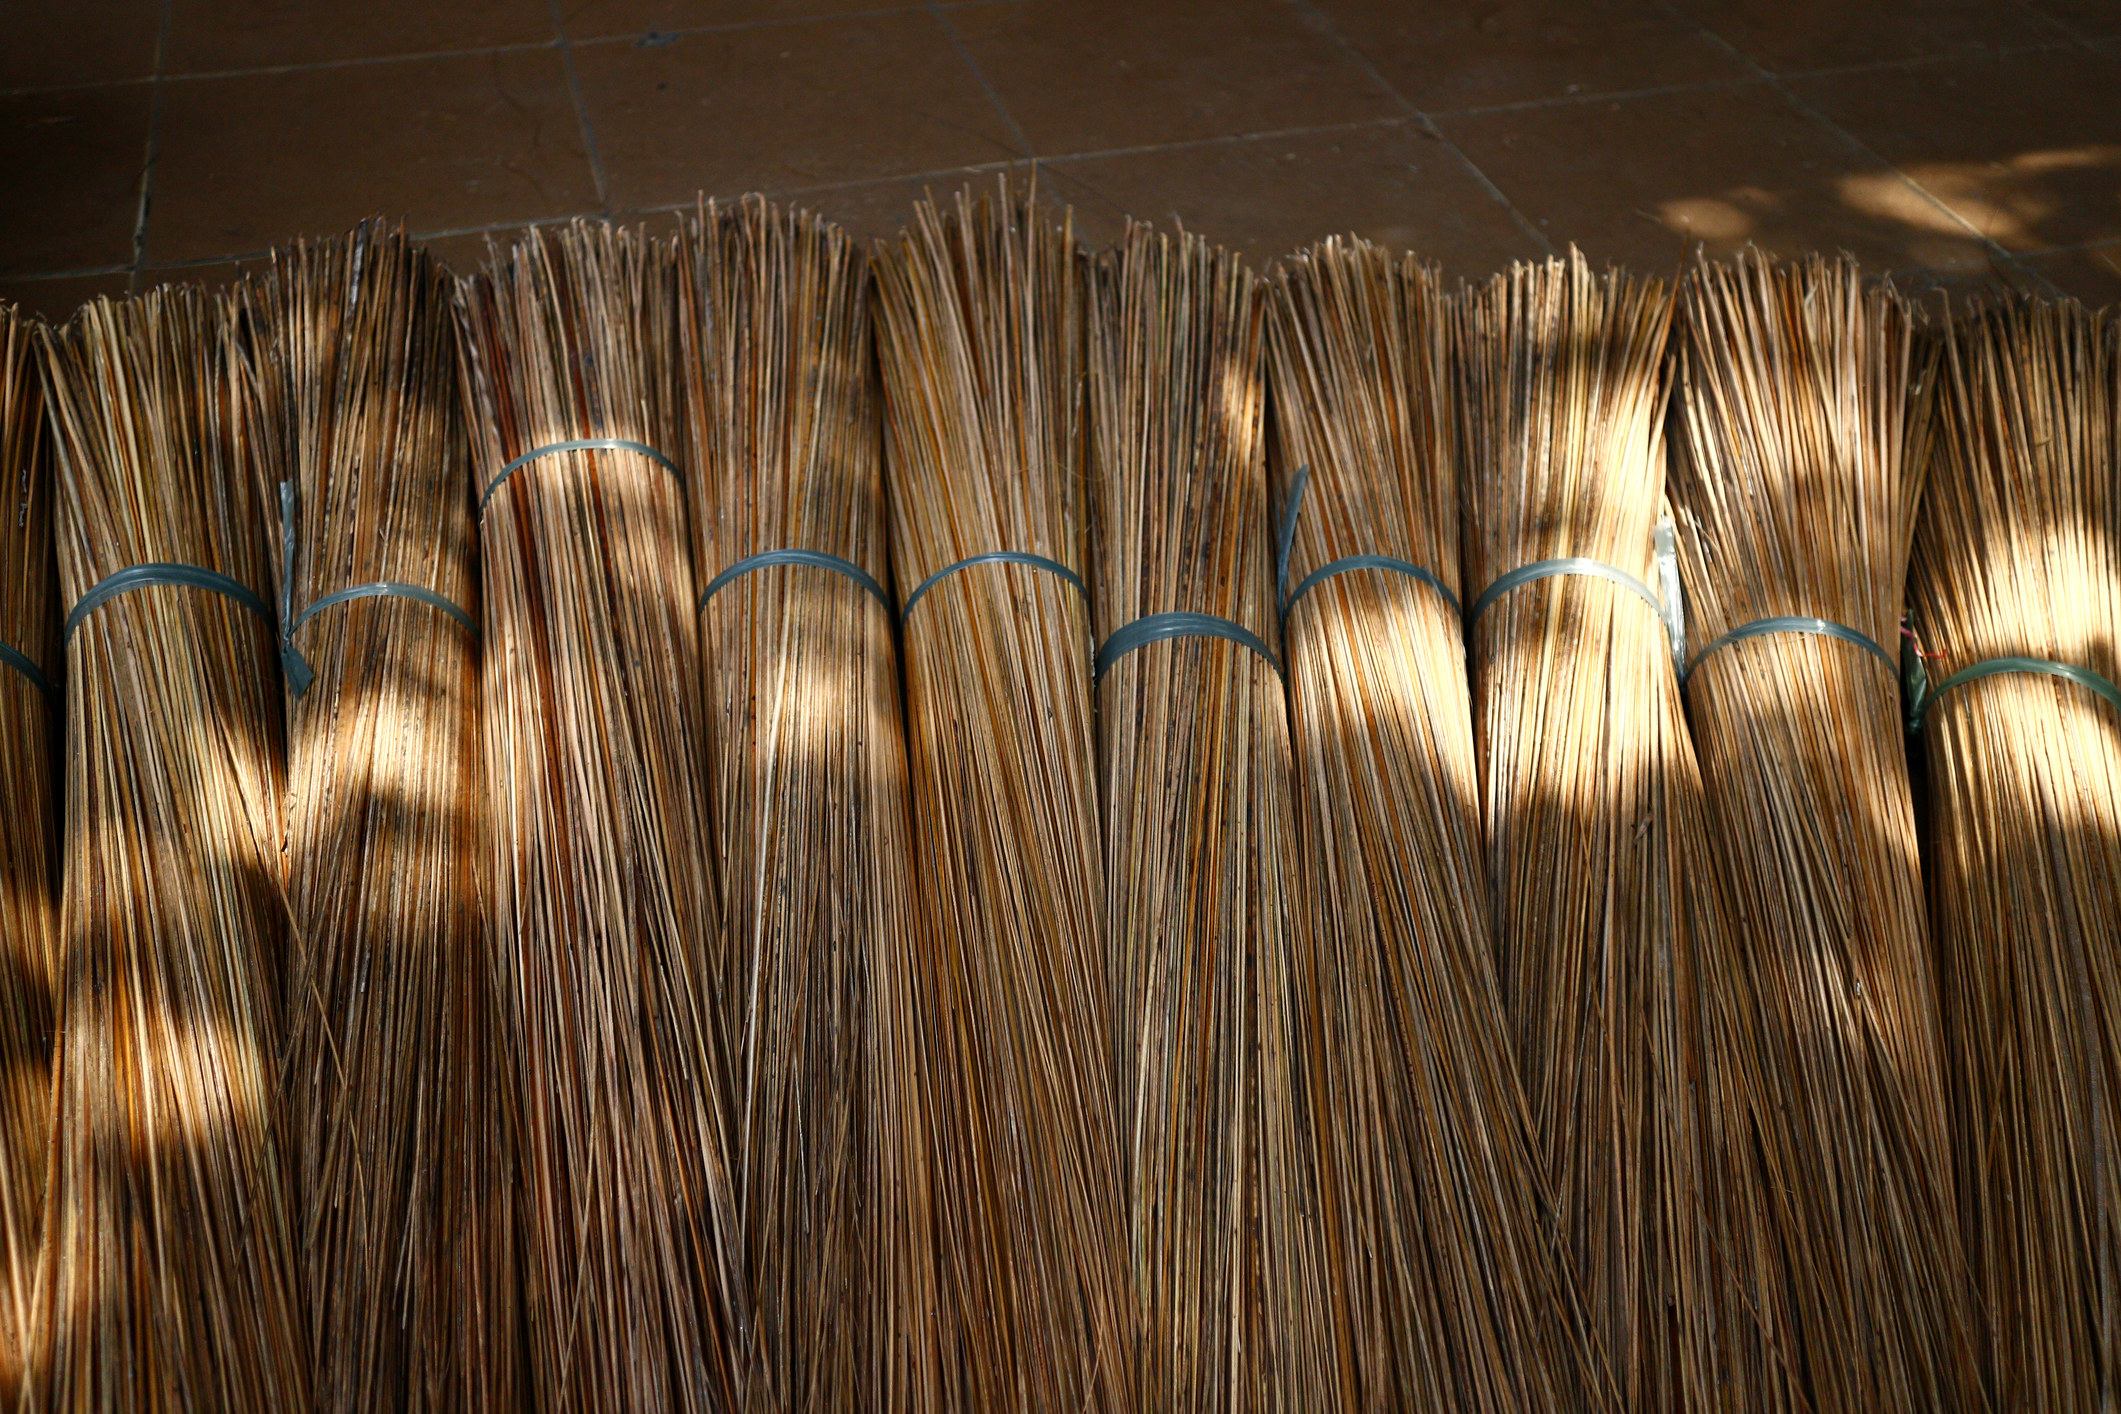 A stack of stick brooms